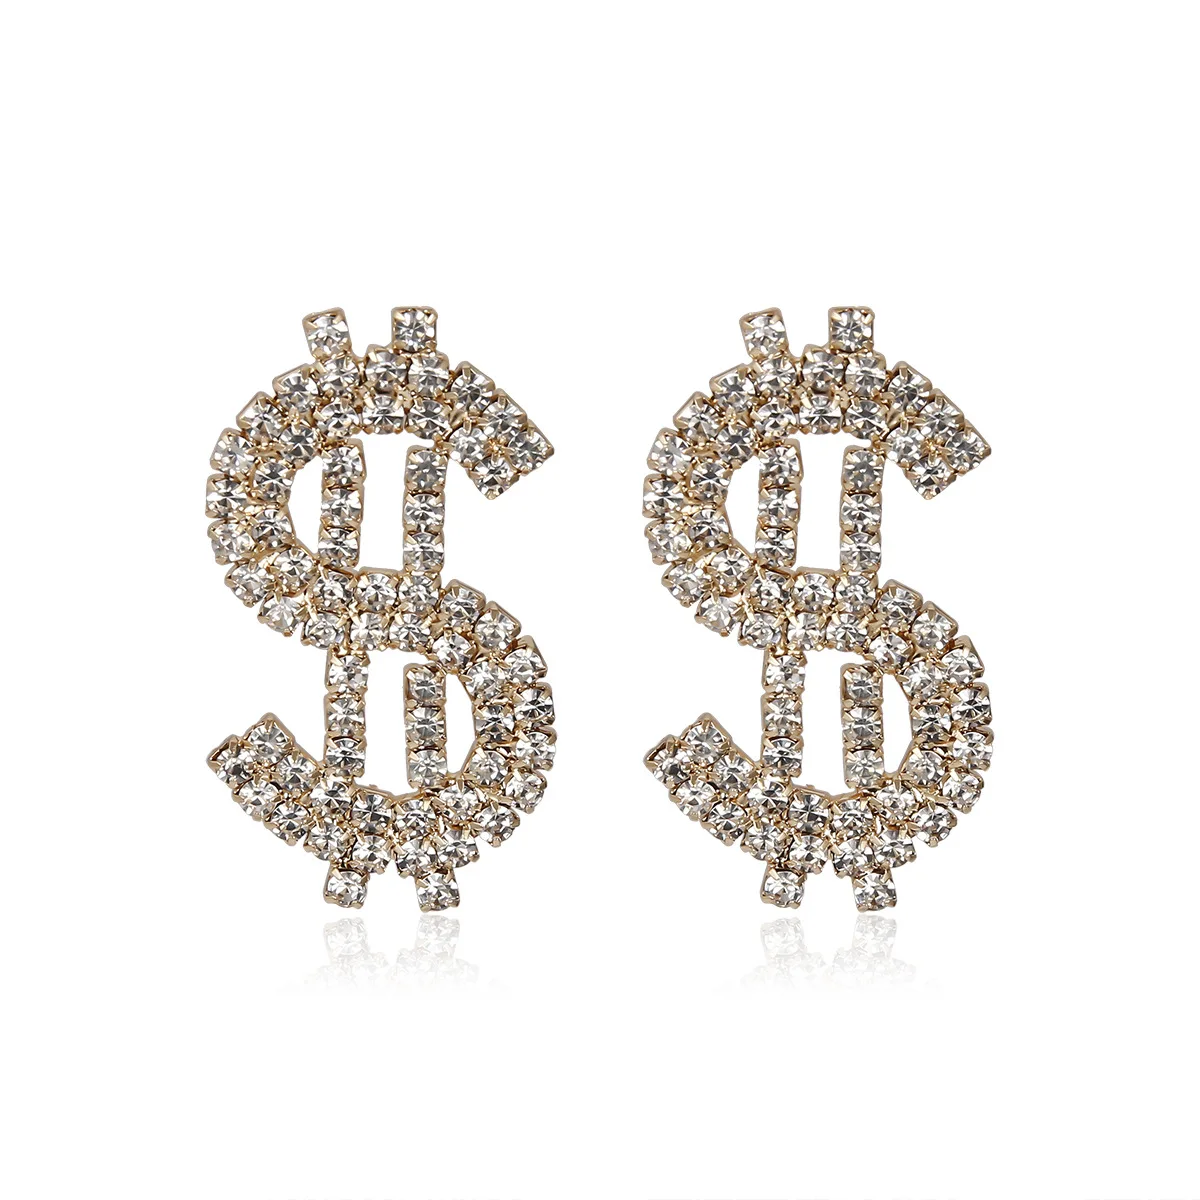 Personality Shiny Full Rhinestone US Dollar Stud Earrings for Women Bling Crystal Earrings Statement Party Jewelry Gift